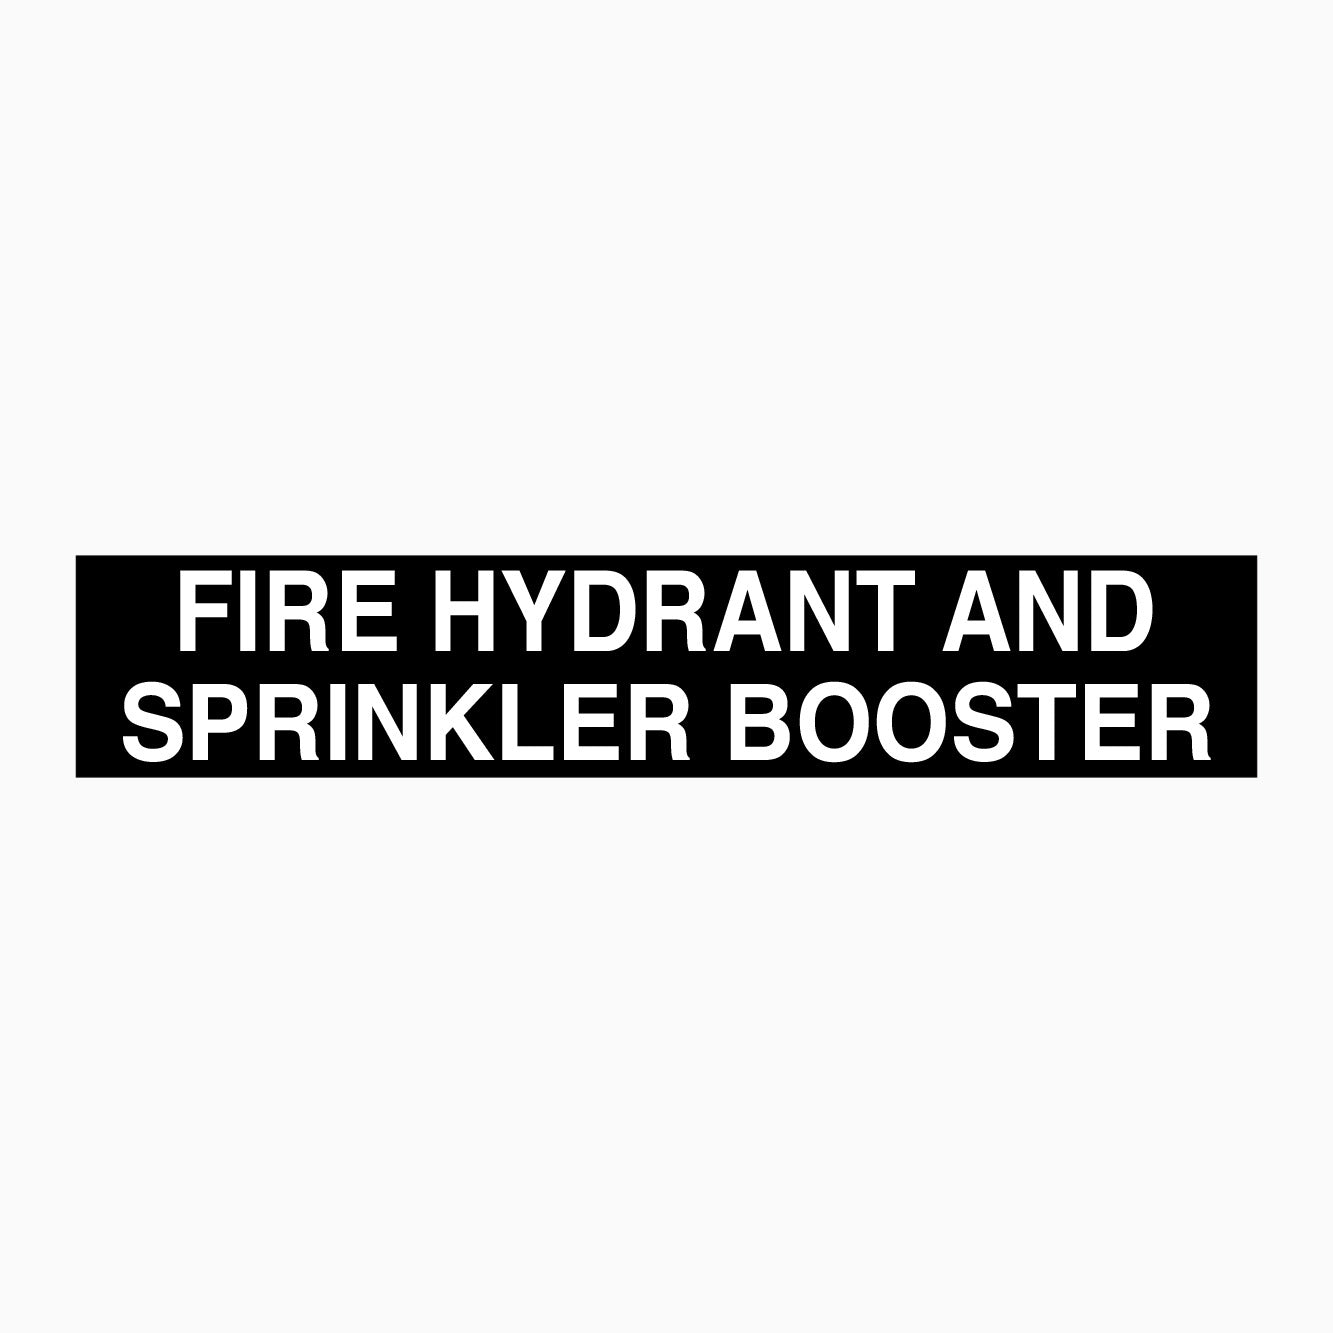 FIRE HYDRANT AND SPRINKLER BOOSTER SIGN